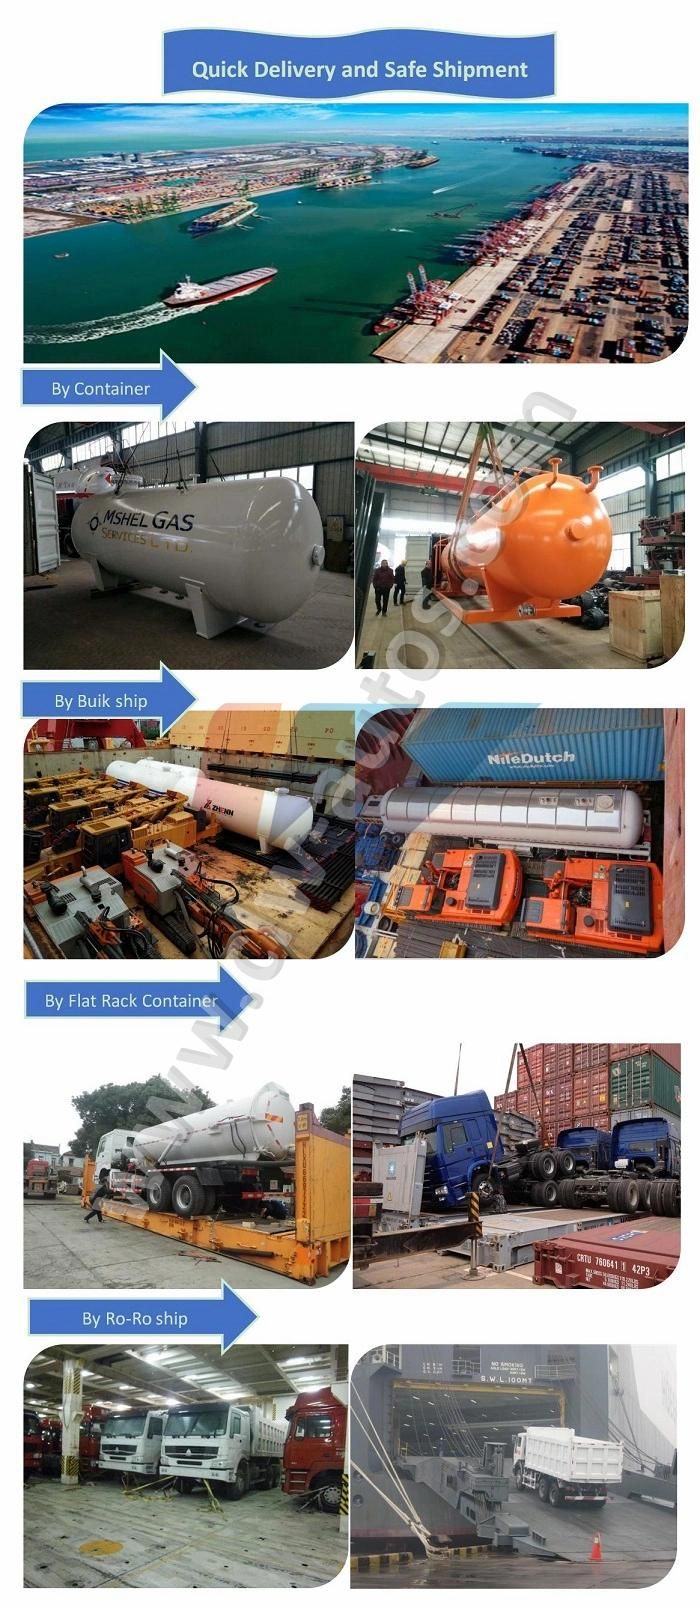 20000liters 20m3 20tons Sinotruk HOWO Water Transport Truck Water Sprinkler Water Bowser Truck for Africa